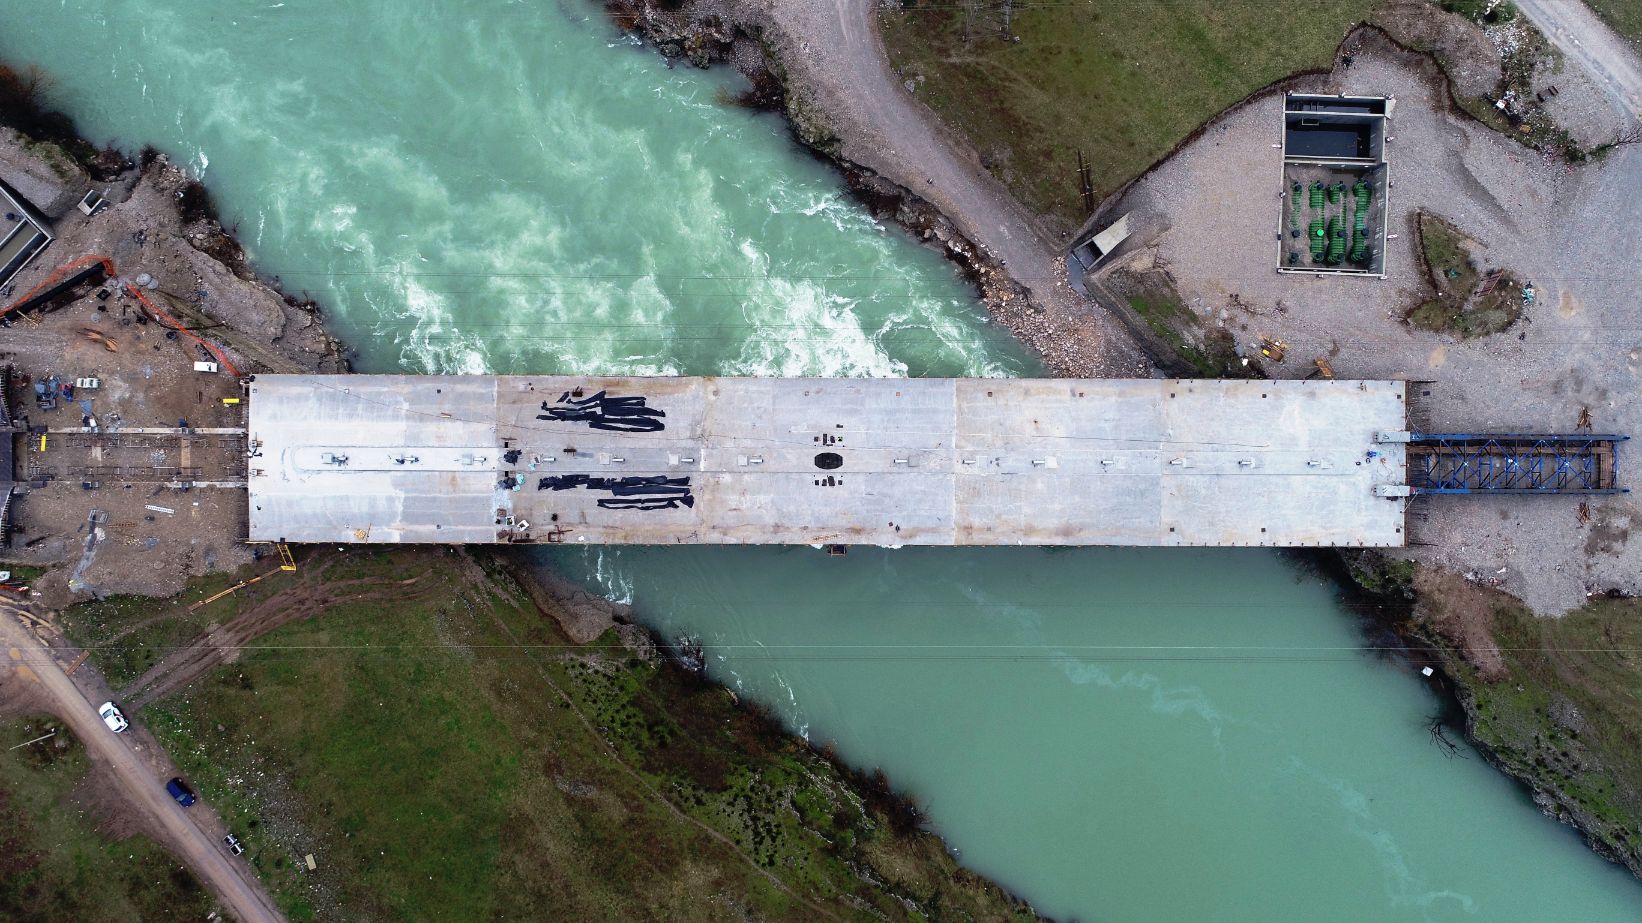 The bridge on the Southwest bypass connects the banks of Morača: Podgorica will soon get another recognizable city symbol